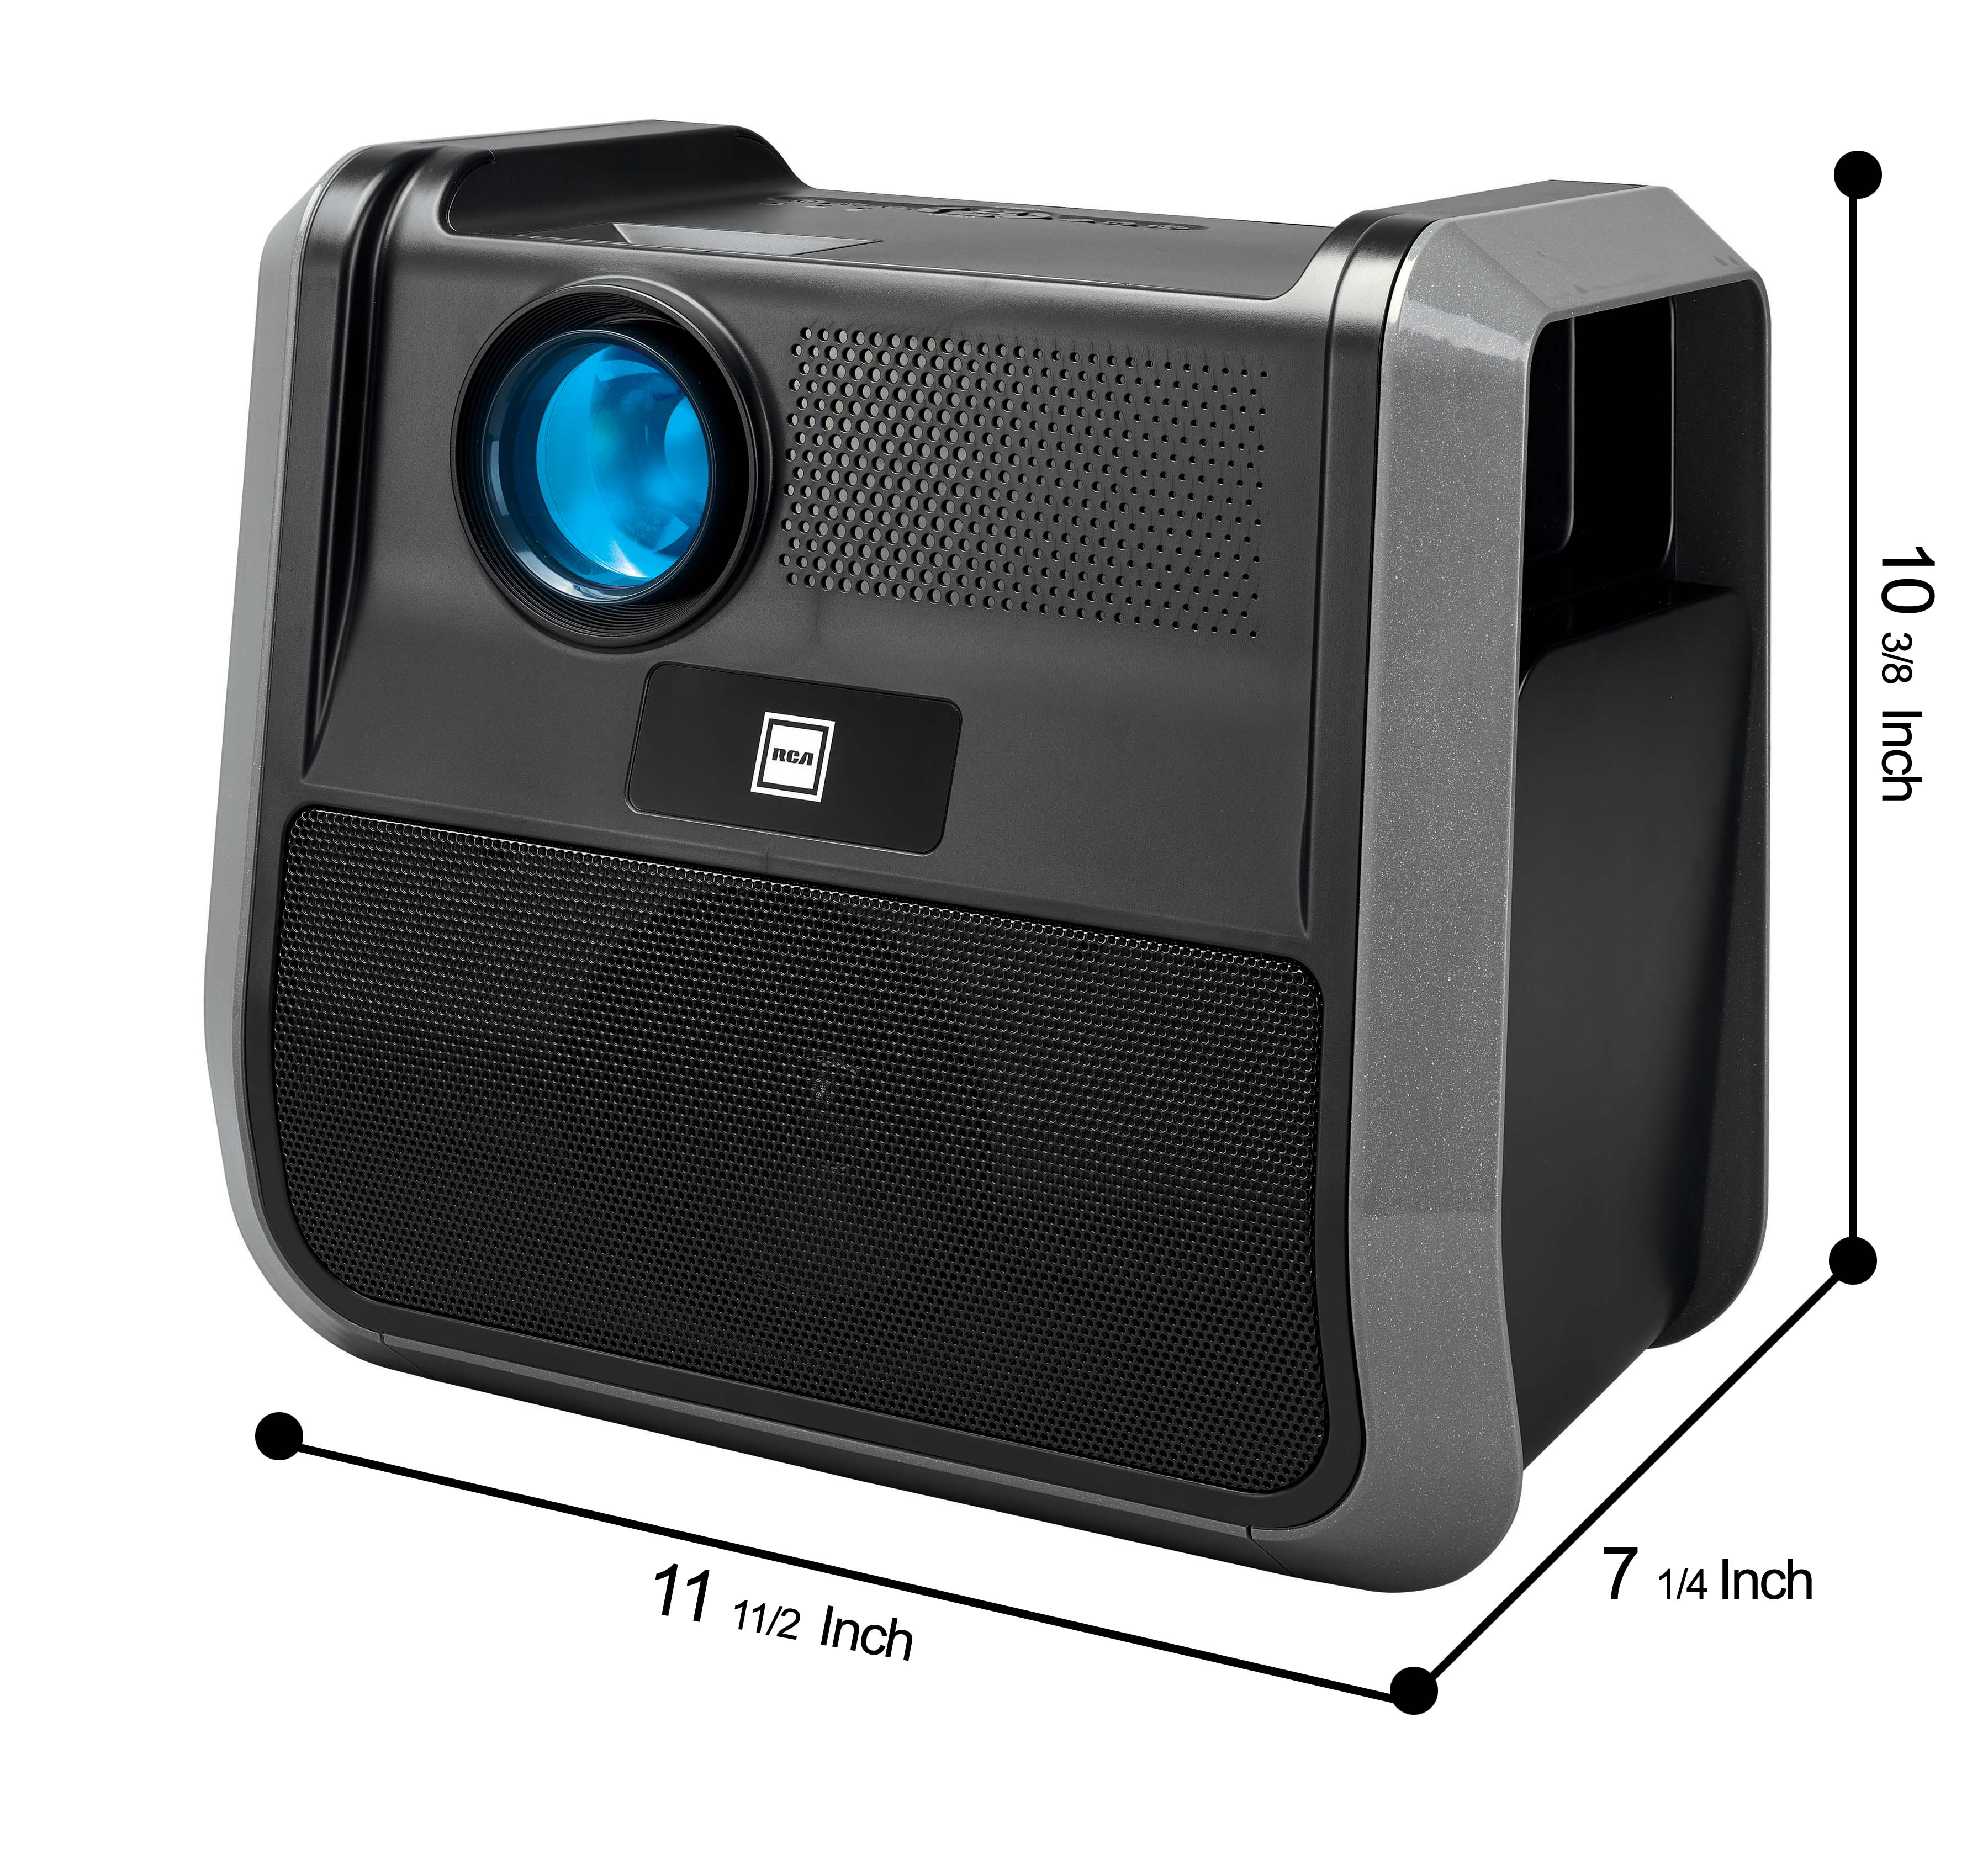 RCA RPJ060 Projector 150" Portable 1080p LED/LCD | Rechargeable Battery | Built-in Handles and Speaker - Black/Gray - image 3 of 7